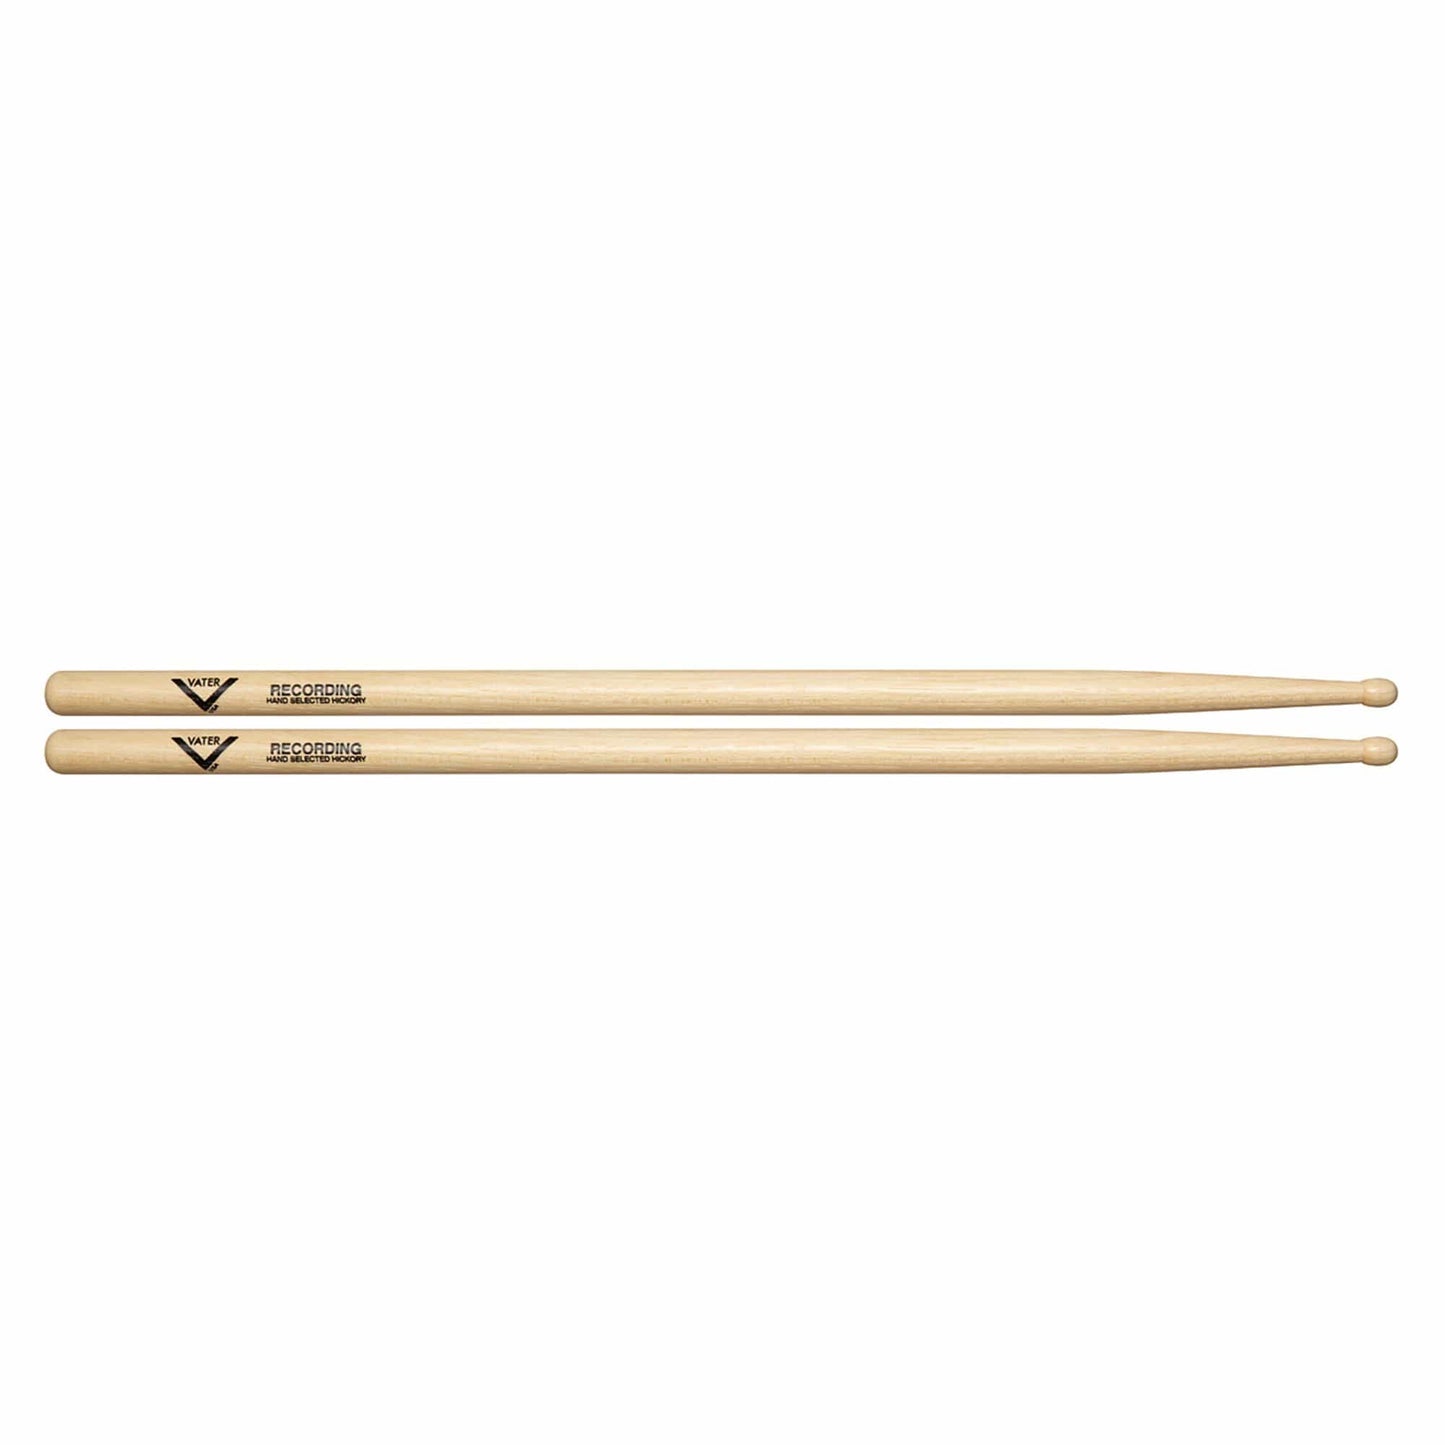 Vater Hickory Recording Wood Tip Drum Sticks Drums and Percussion / Parts and Accessories / Drum Sticks and Mallets